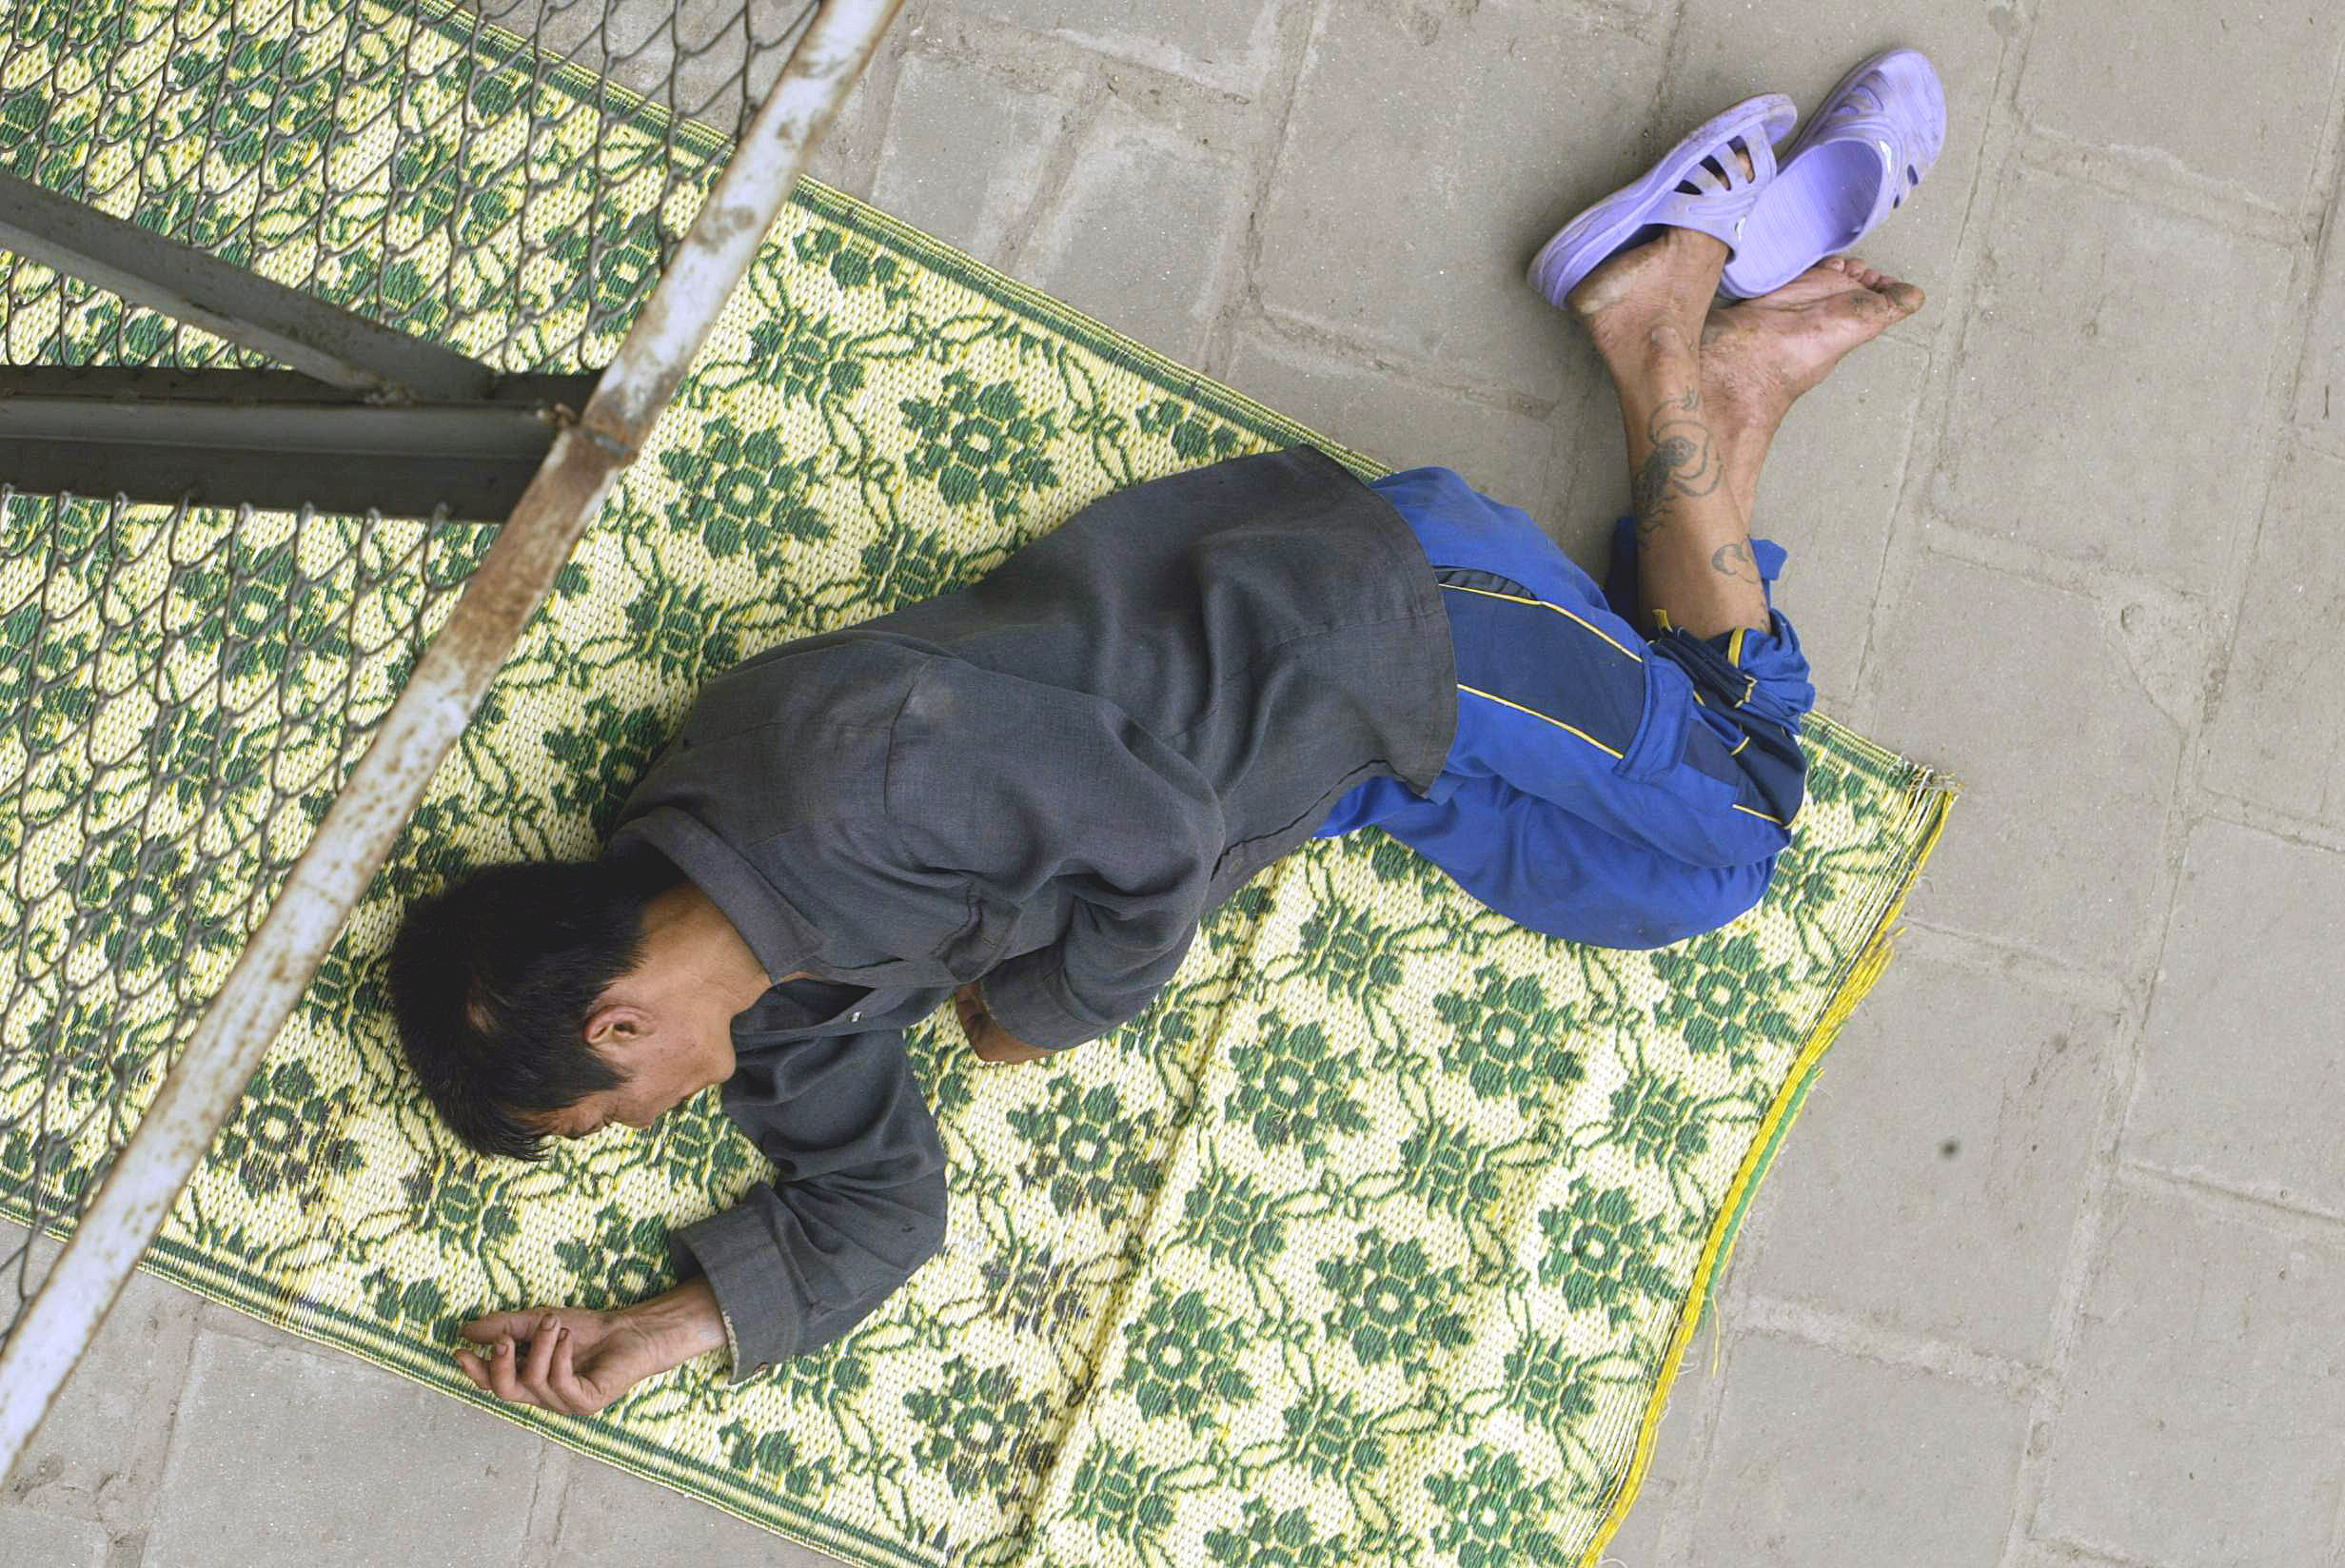 File picture of a drug addict in Hanoi. Photo: AFP